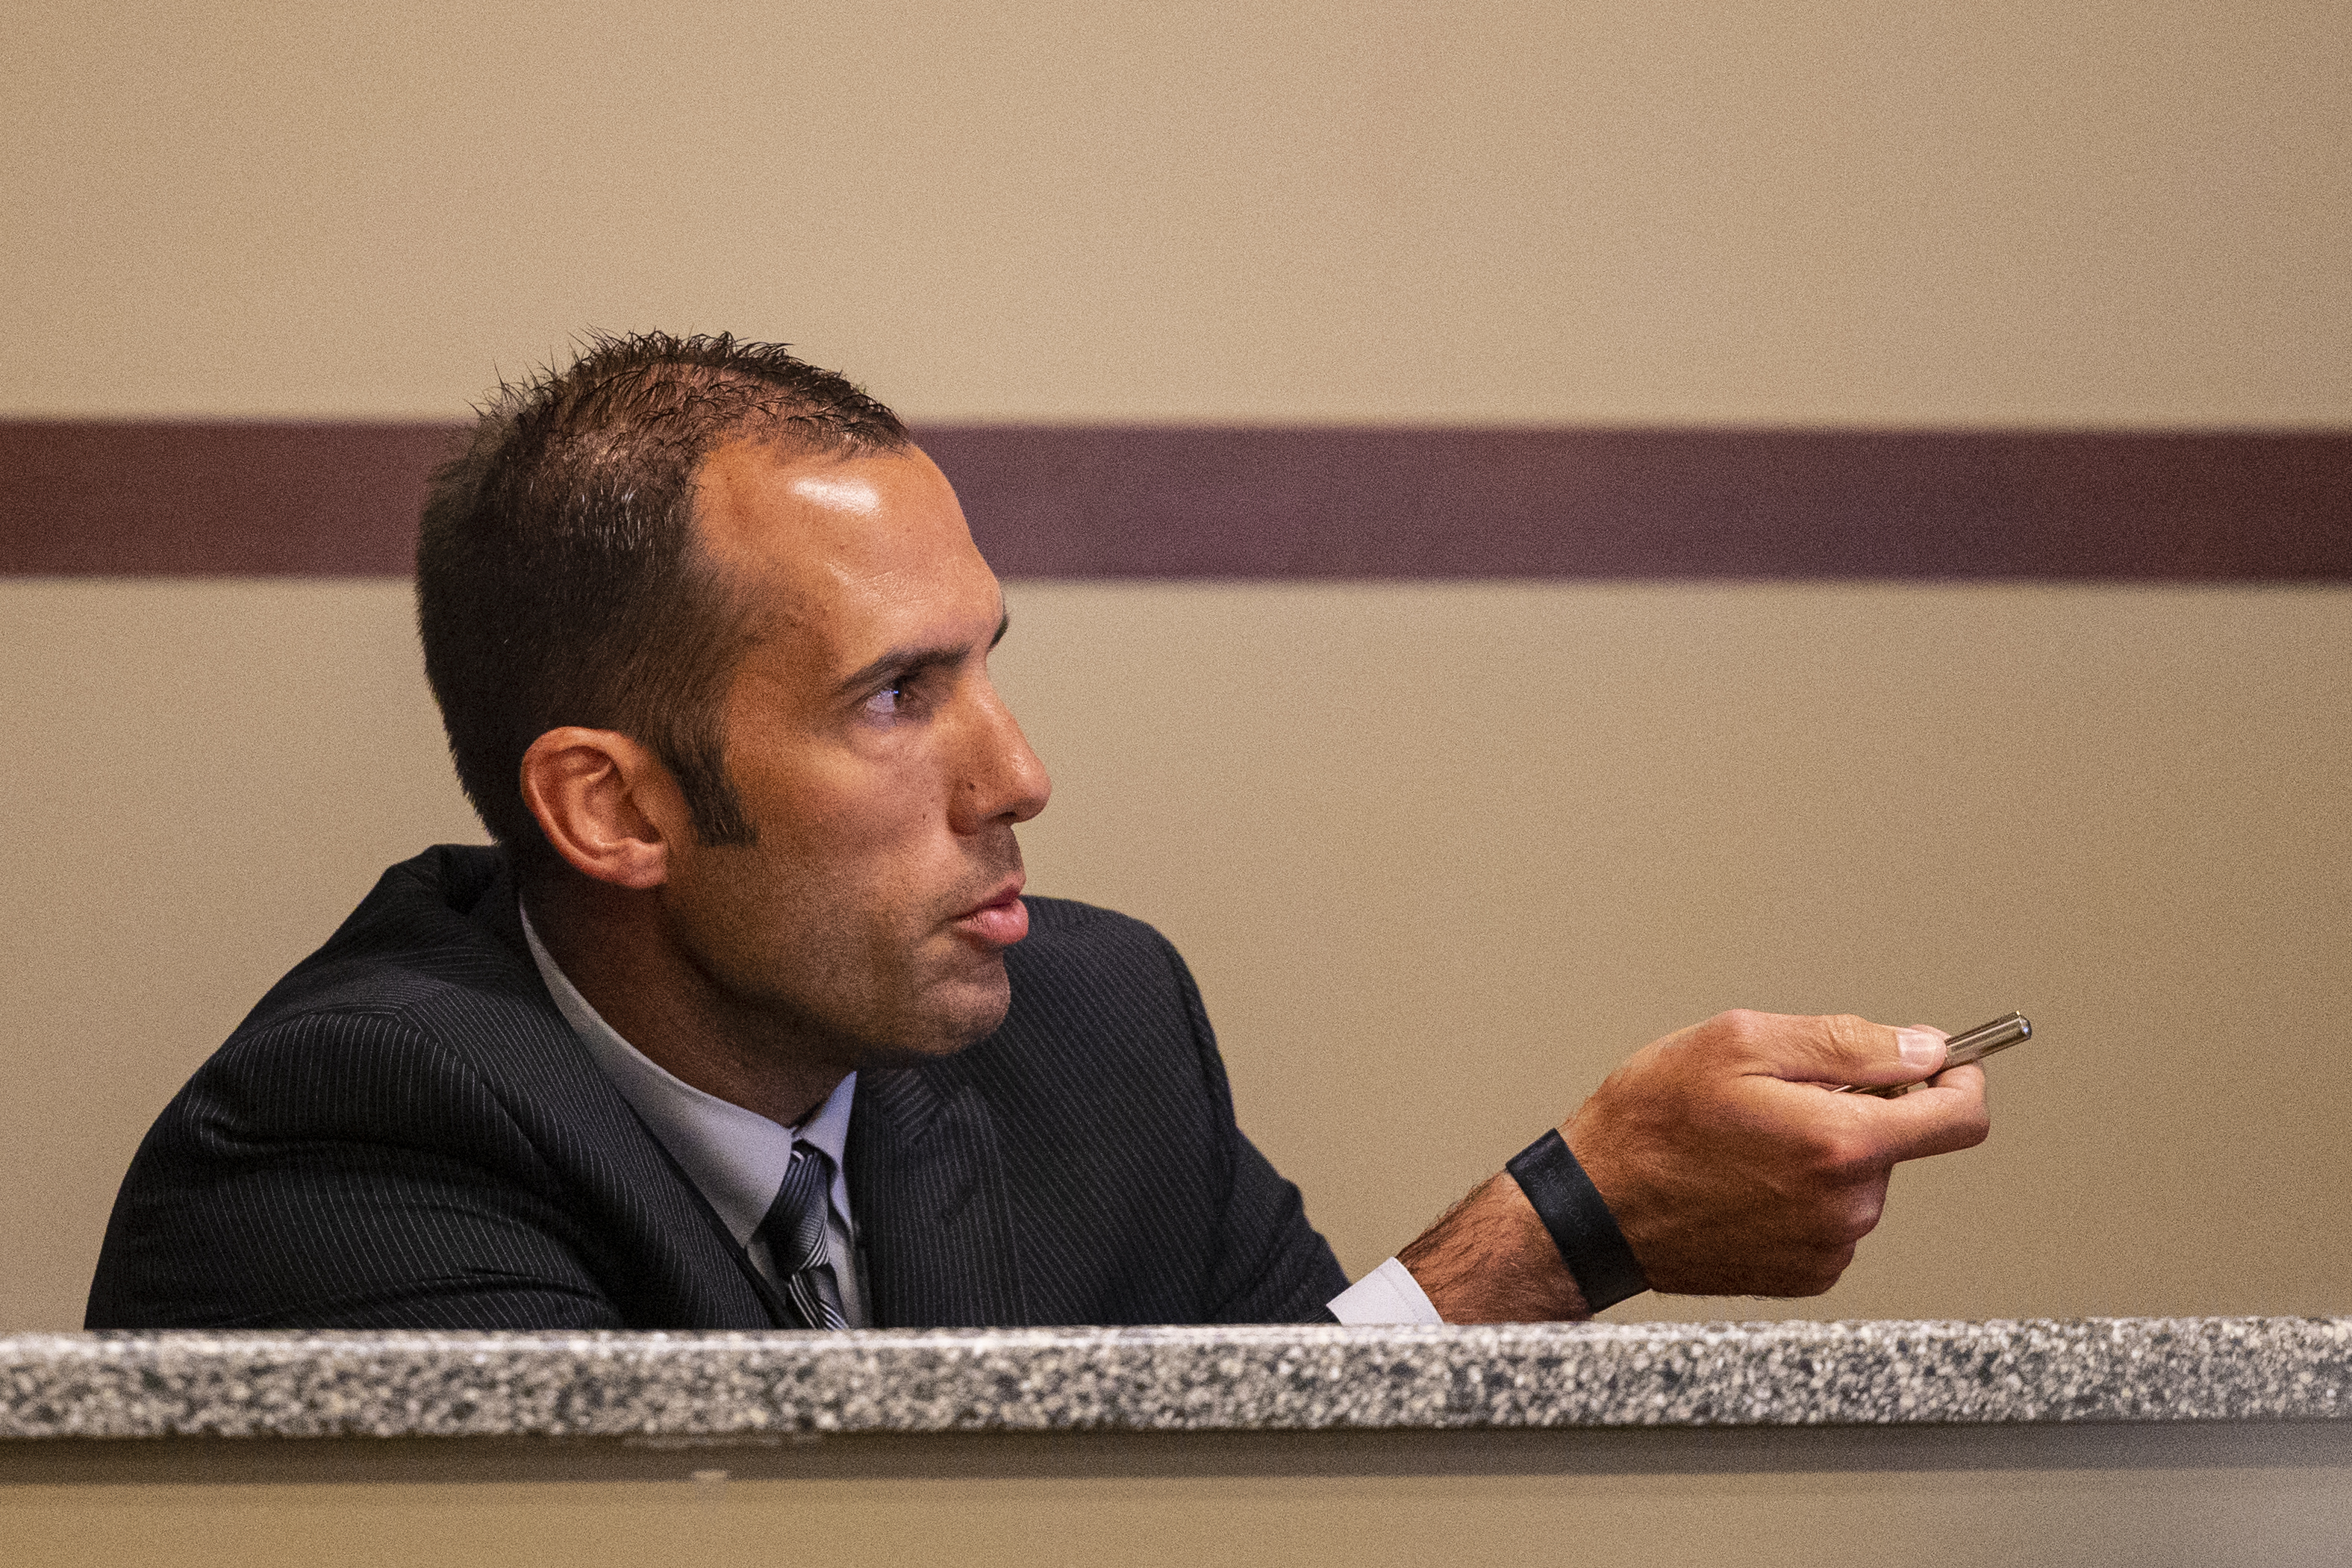 Kent County Sheriff Detective Dustin Cook testifies during the preliminary examination for (not pictured) Rishy Manning, 22, Javonte Rosa, 23 and Jaheim Hayes-Goree, 20, at the 63rd District Courthouse in Grand Rapids, Michigan on Thursday, June 30, 2022. The trio of defendants who appeared in court, are charged with felony murder in the shooting death of Joseph Wilder, 50, who was shot and killed during a robbery attempt at a Huntington Bank ATM on South Division Avenue in May of 2022. (Joel Bissell | MLive.com)